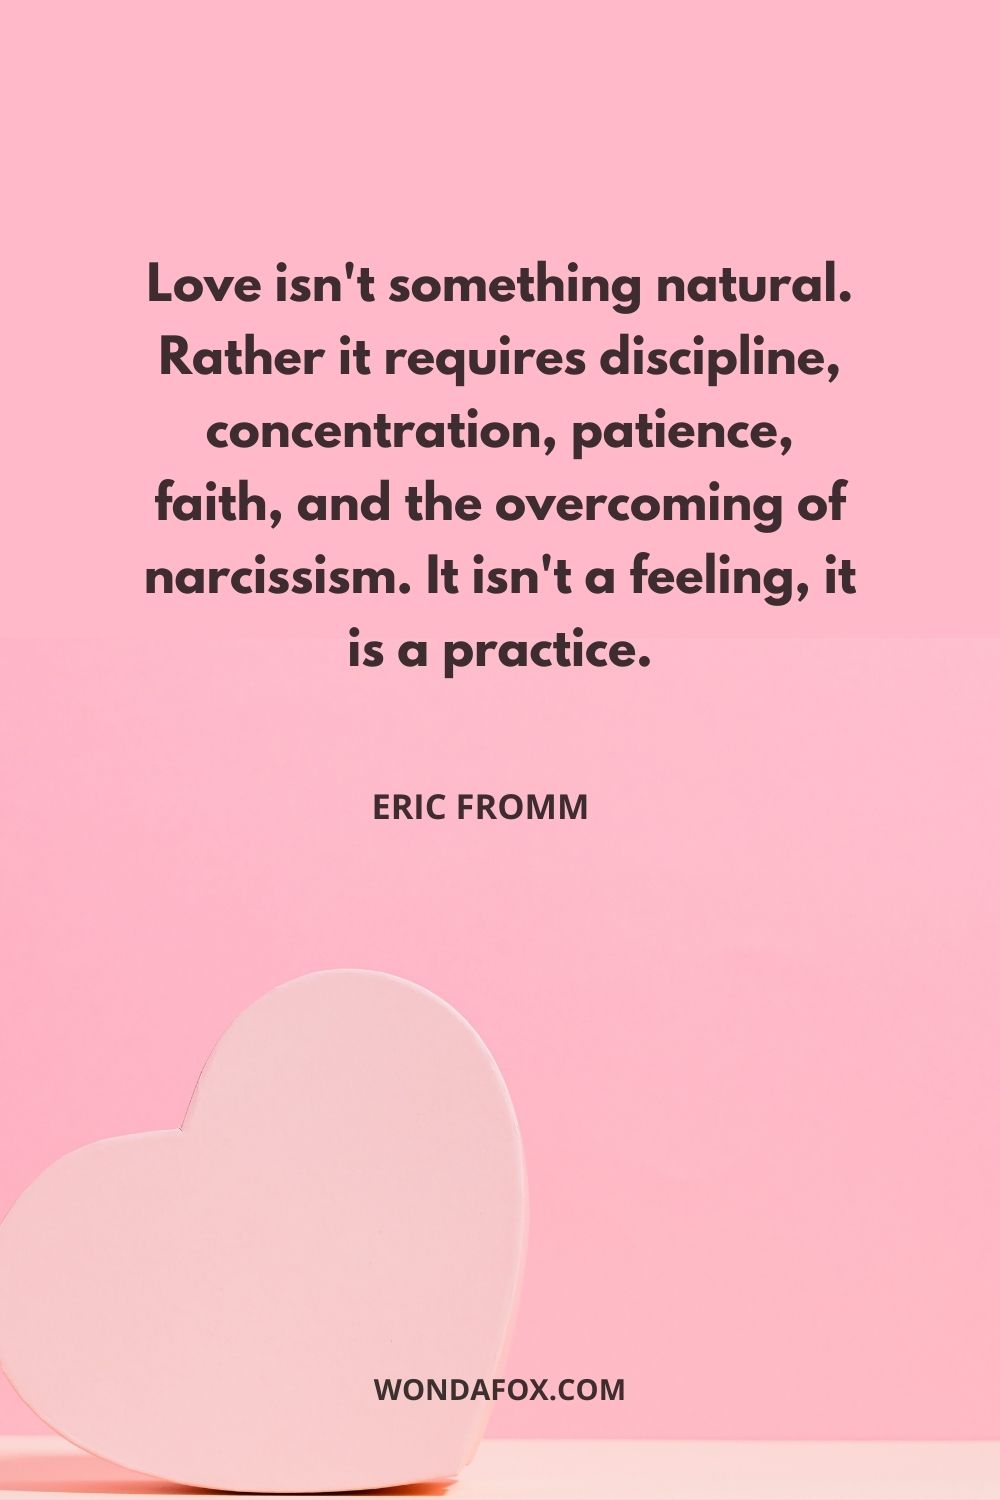 Love isn't something natural. Rather it requires discipline, concentration, patience, faith, and the overcoming of narcissism. It isn't a feeling, it is a practice.